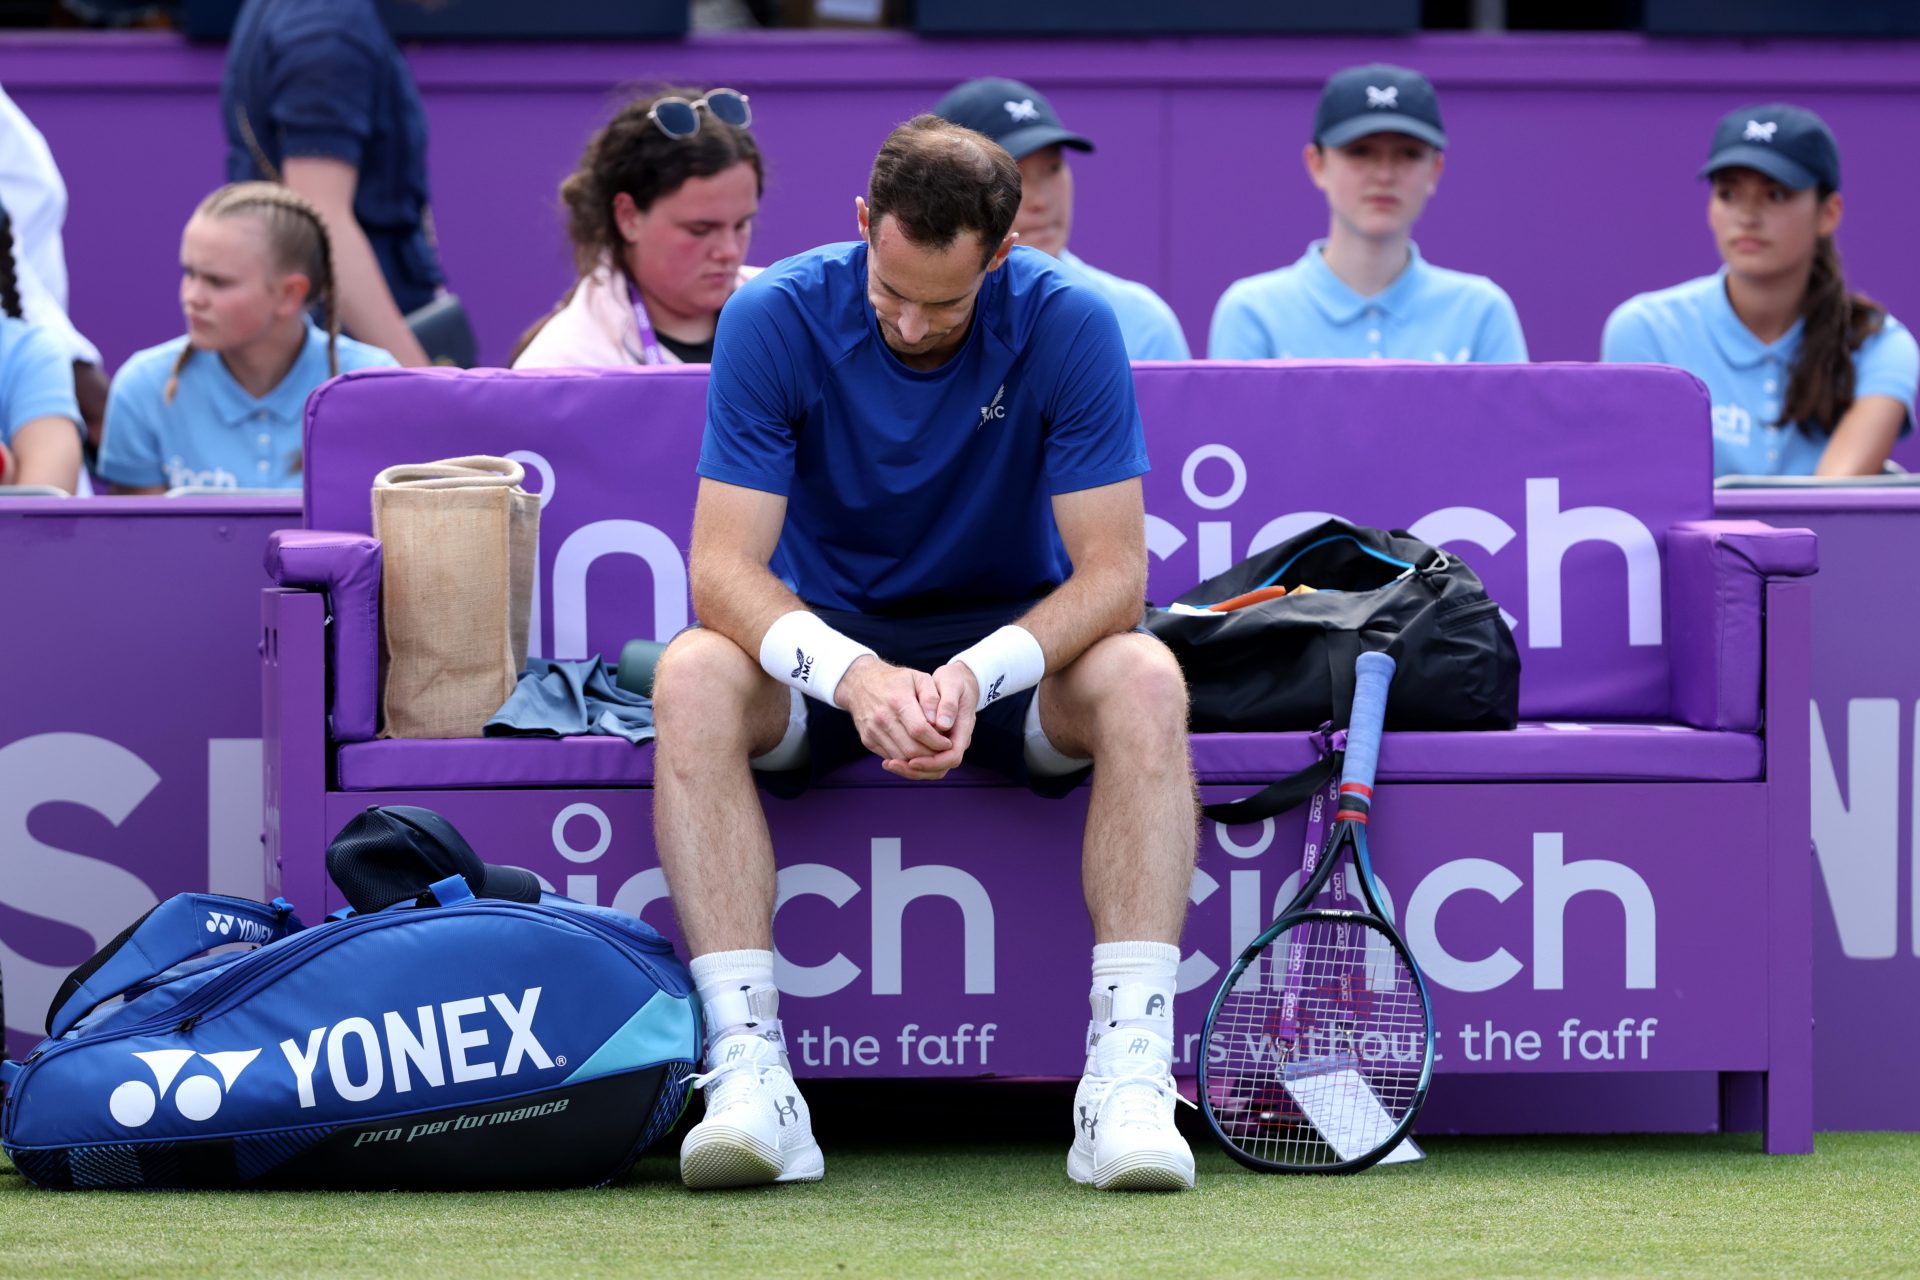 Are Andy Murray’s days numbered at the top of tennis?